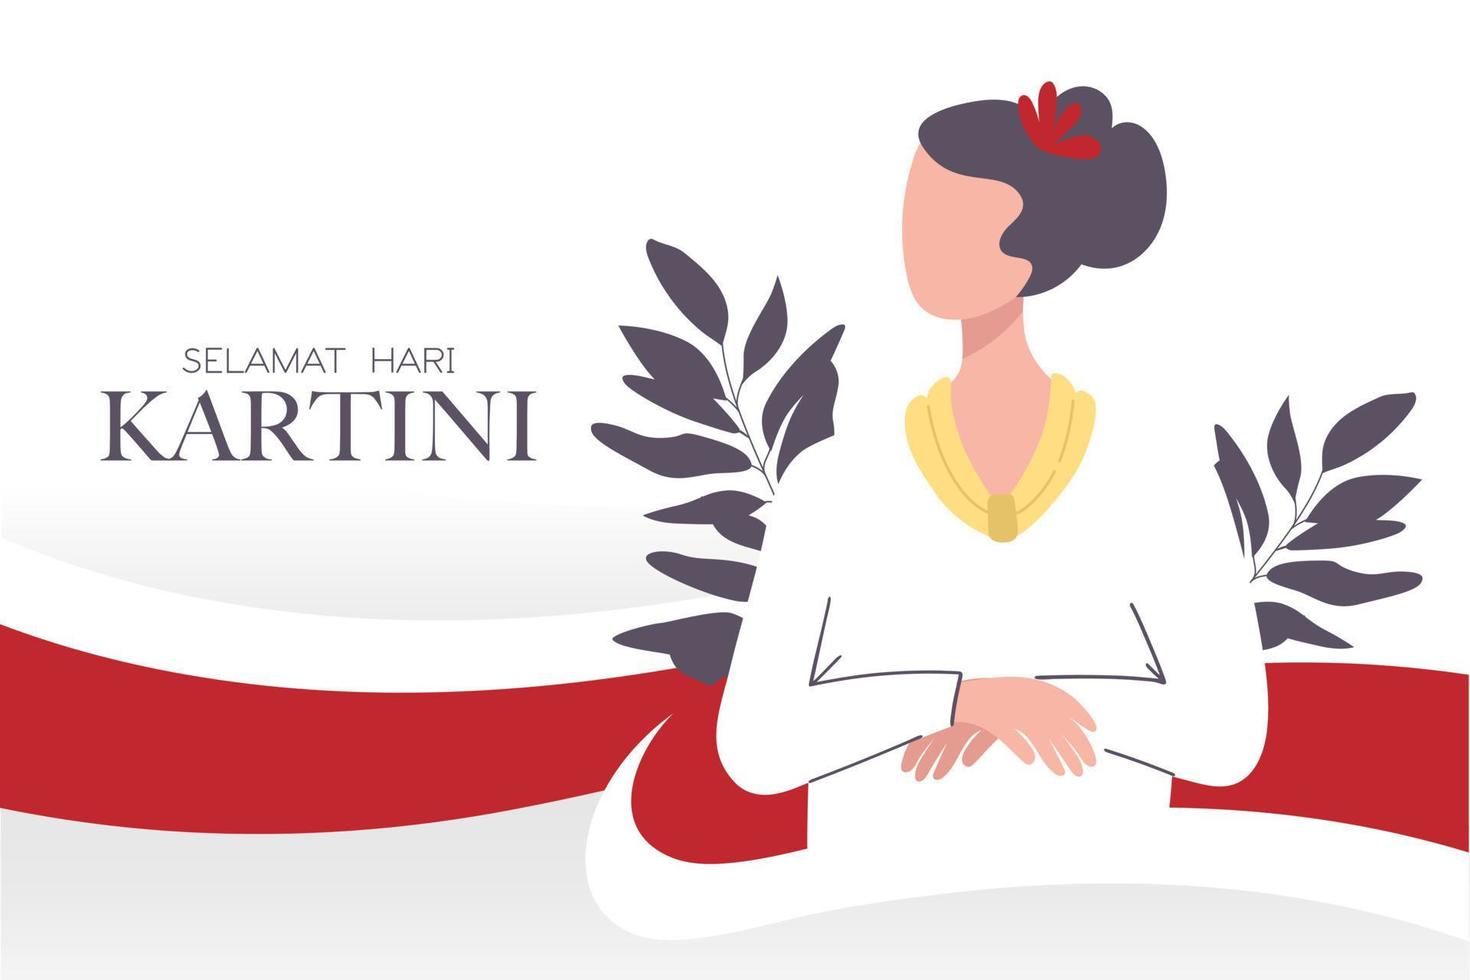 Selamat Hari Kartini Celebration Happy Kartini Day. Indonesian activist who advocated for women's rights and female education. Feminism heroes. vector